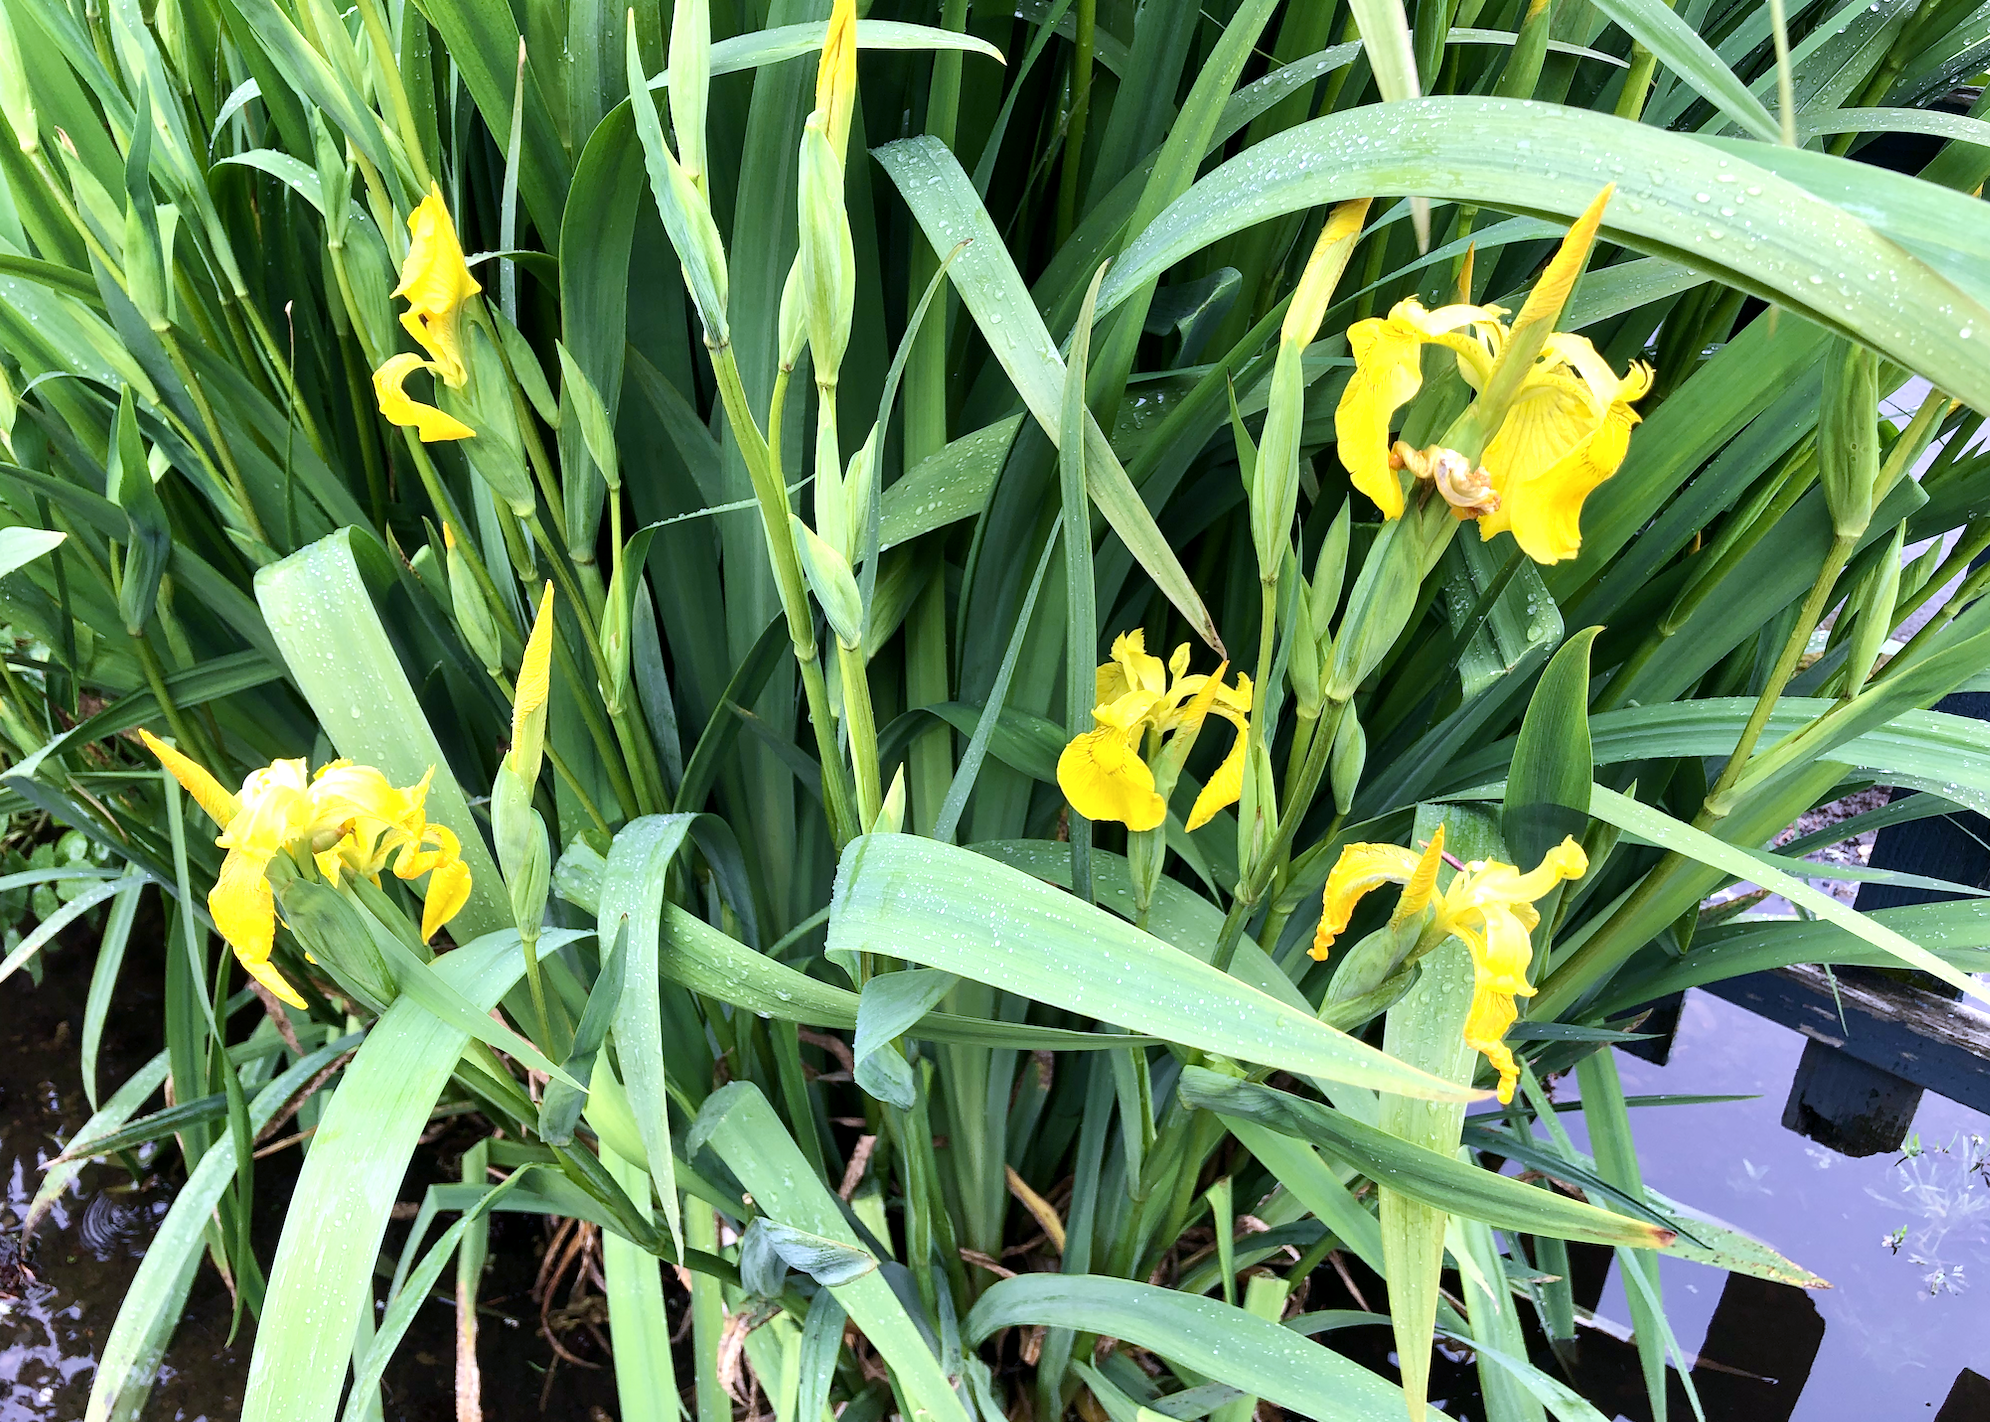 Yellow flag iris growing in a drainage ditch